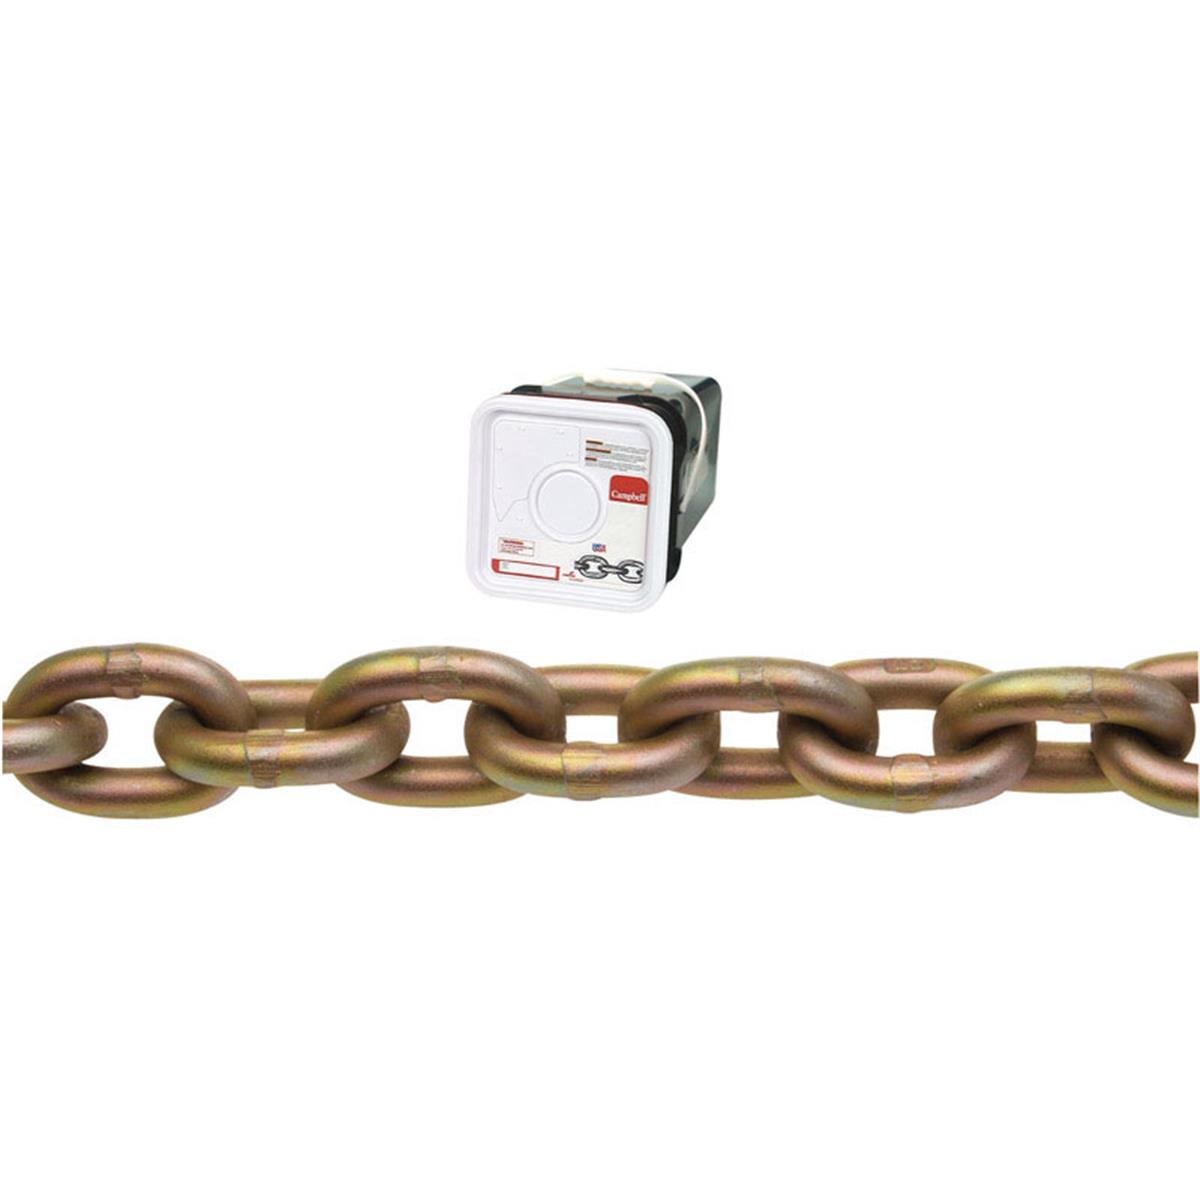 Picture of Apex Tool Group 510526 0.3 in. x 50 ft.Chain Transport